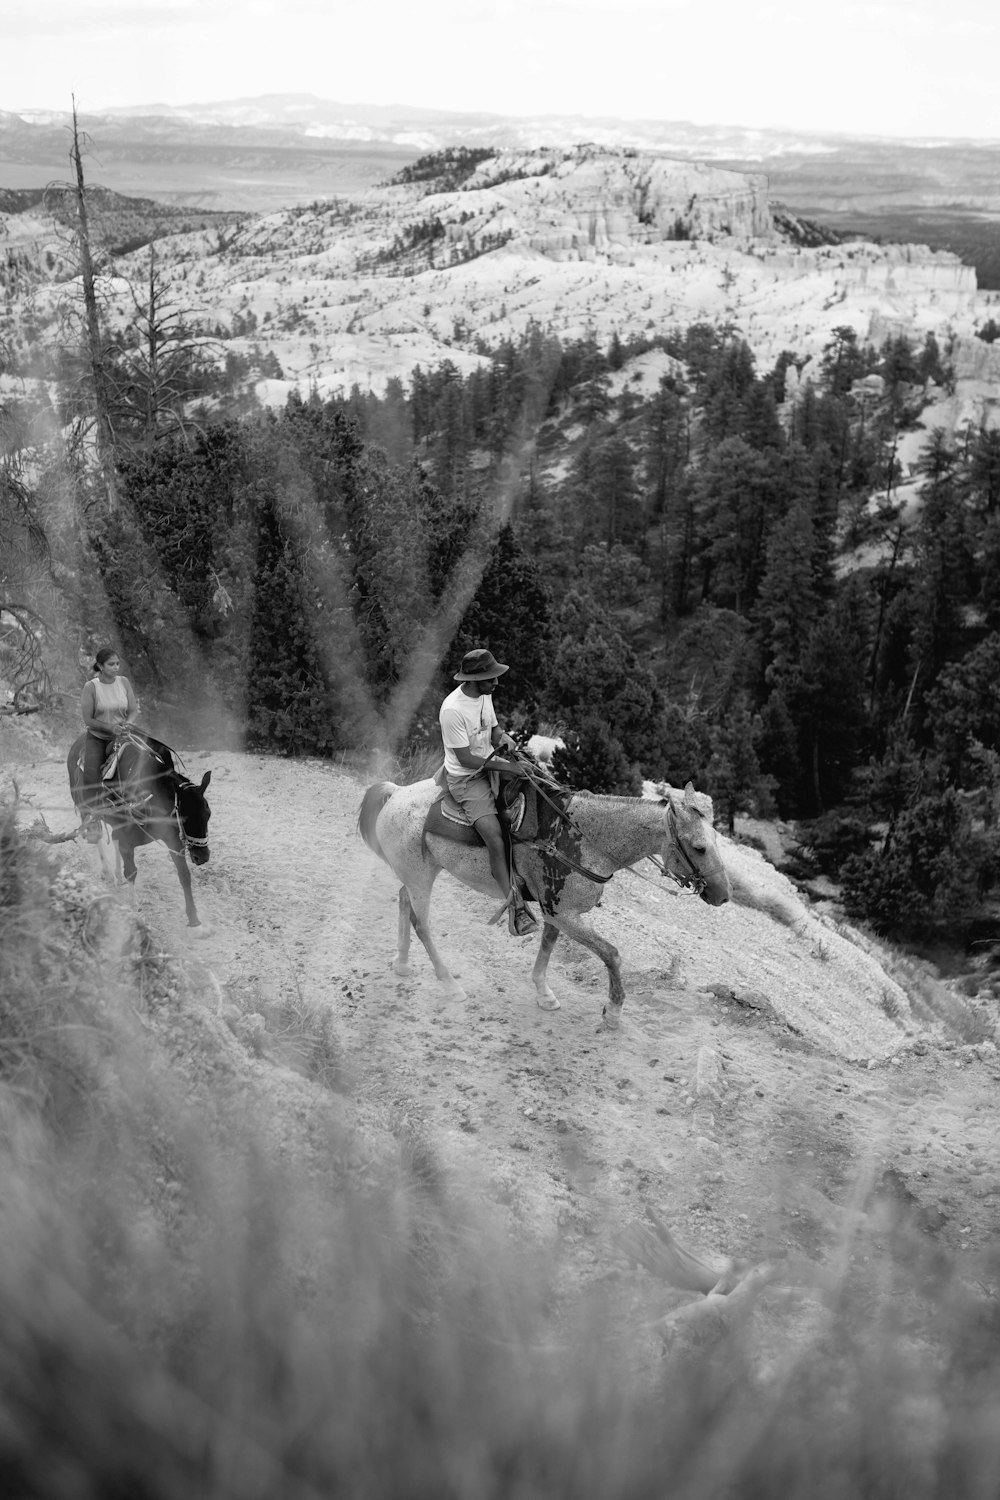 grayscale photo of people riding horses on dirt road